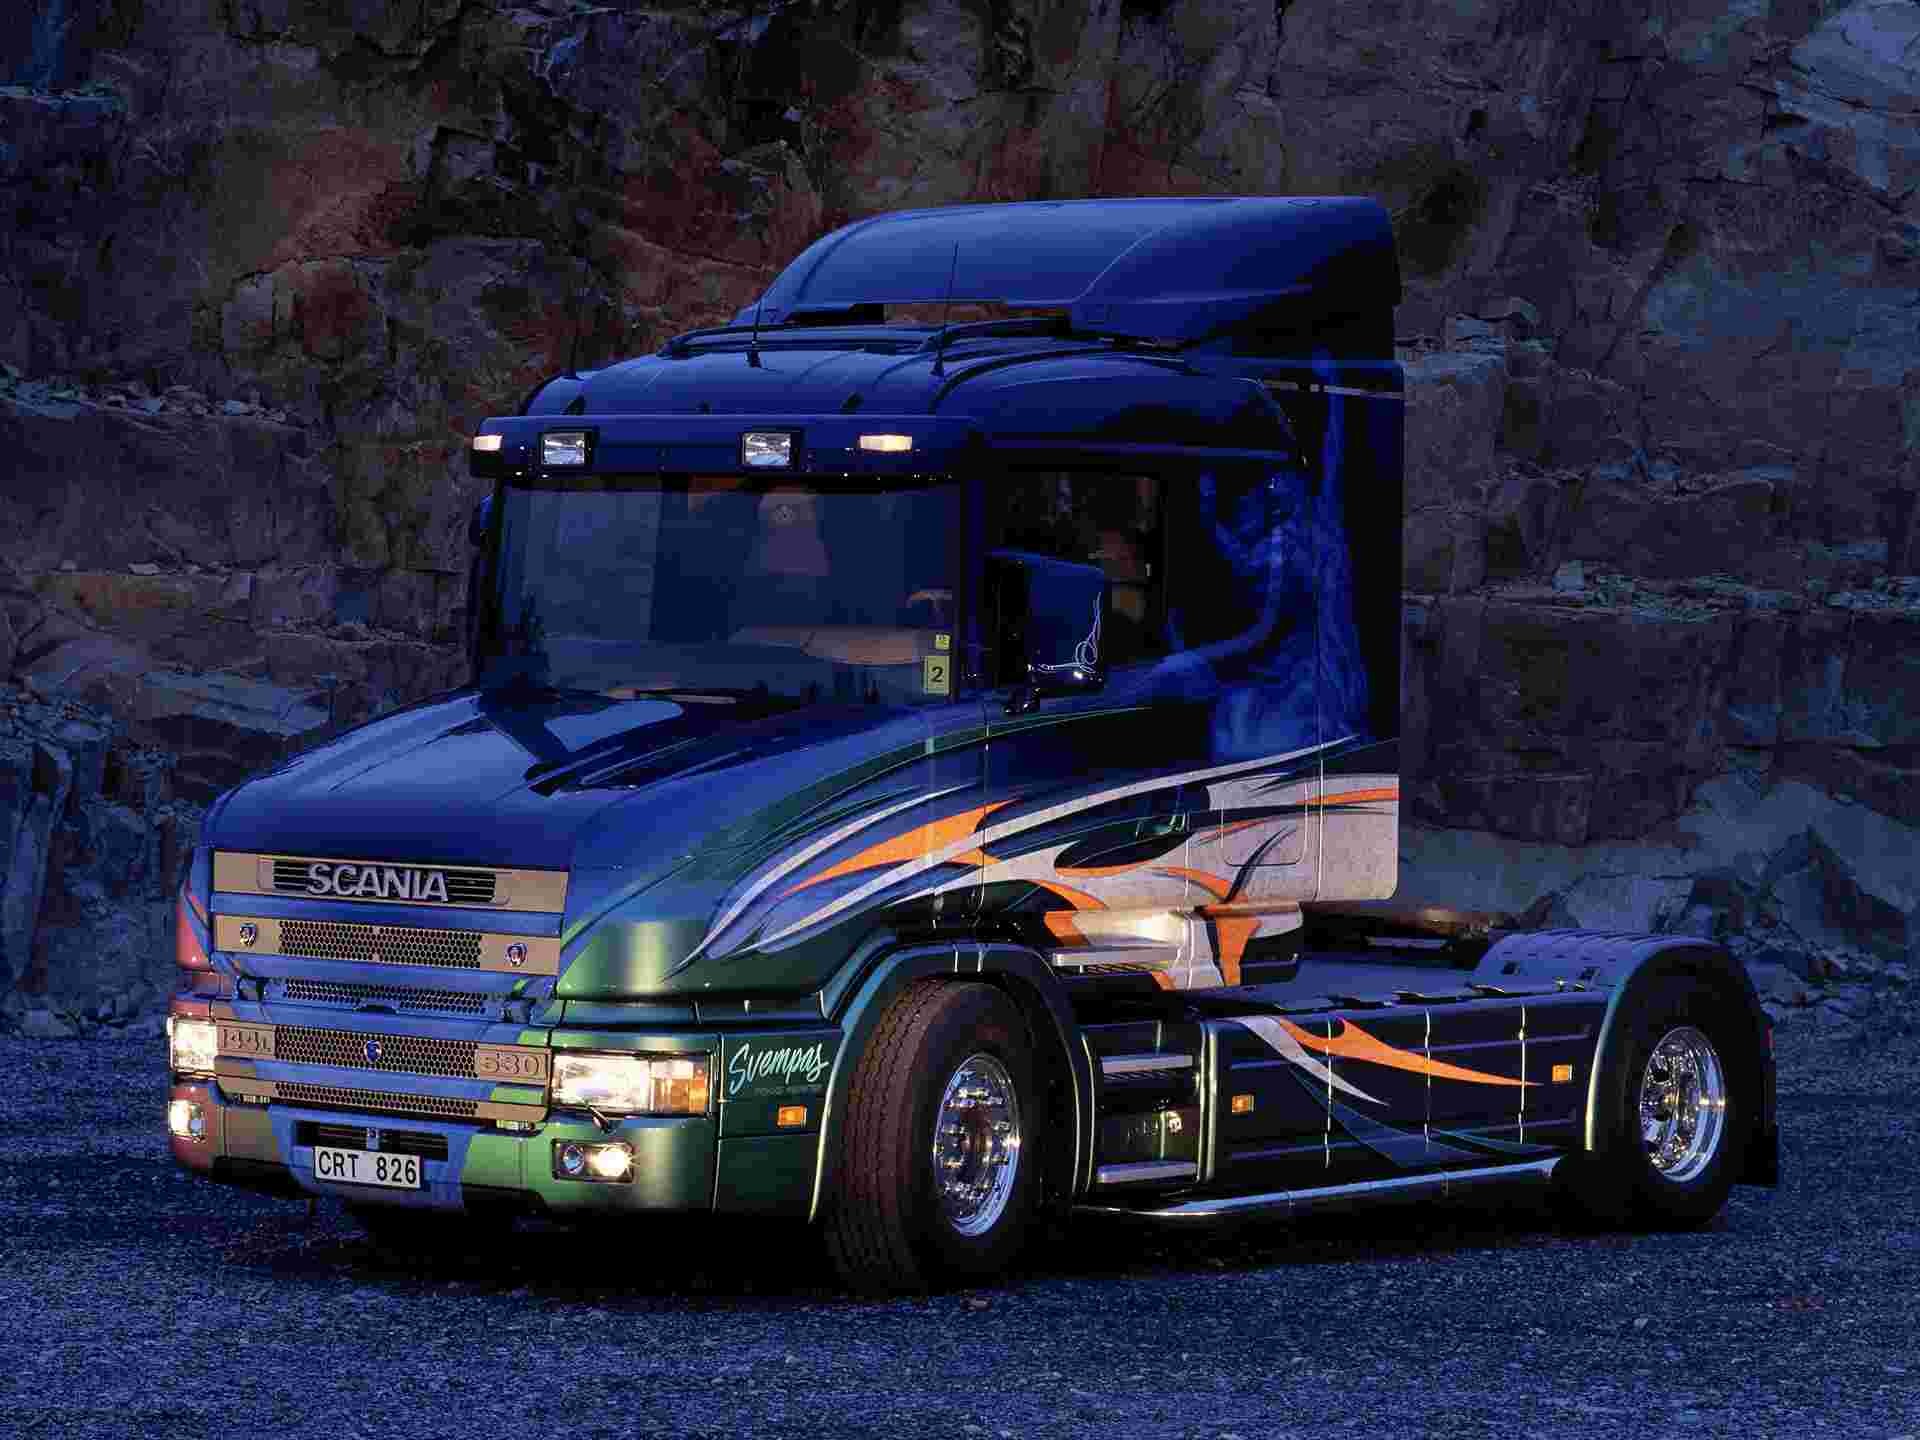 1920x1440 Another Wallpaper of Scania